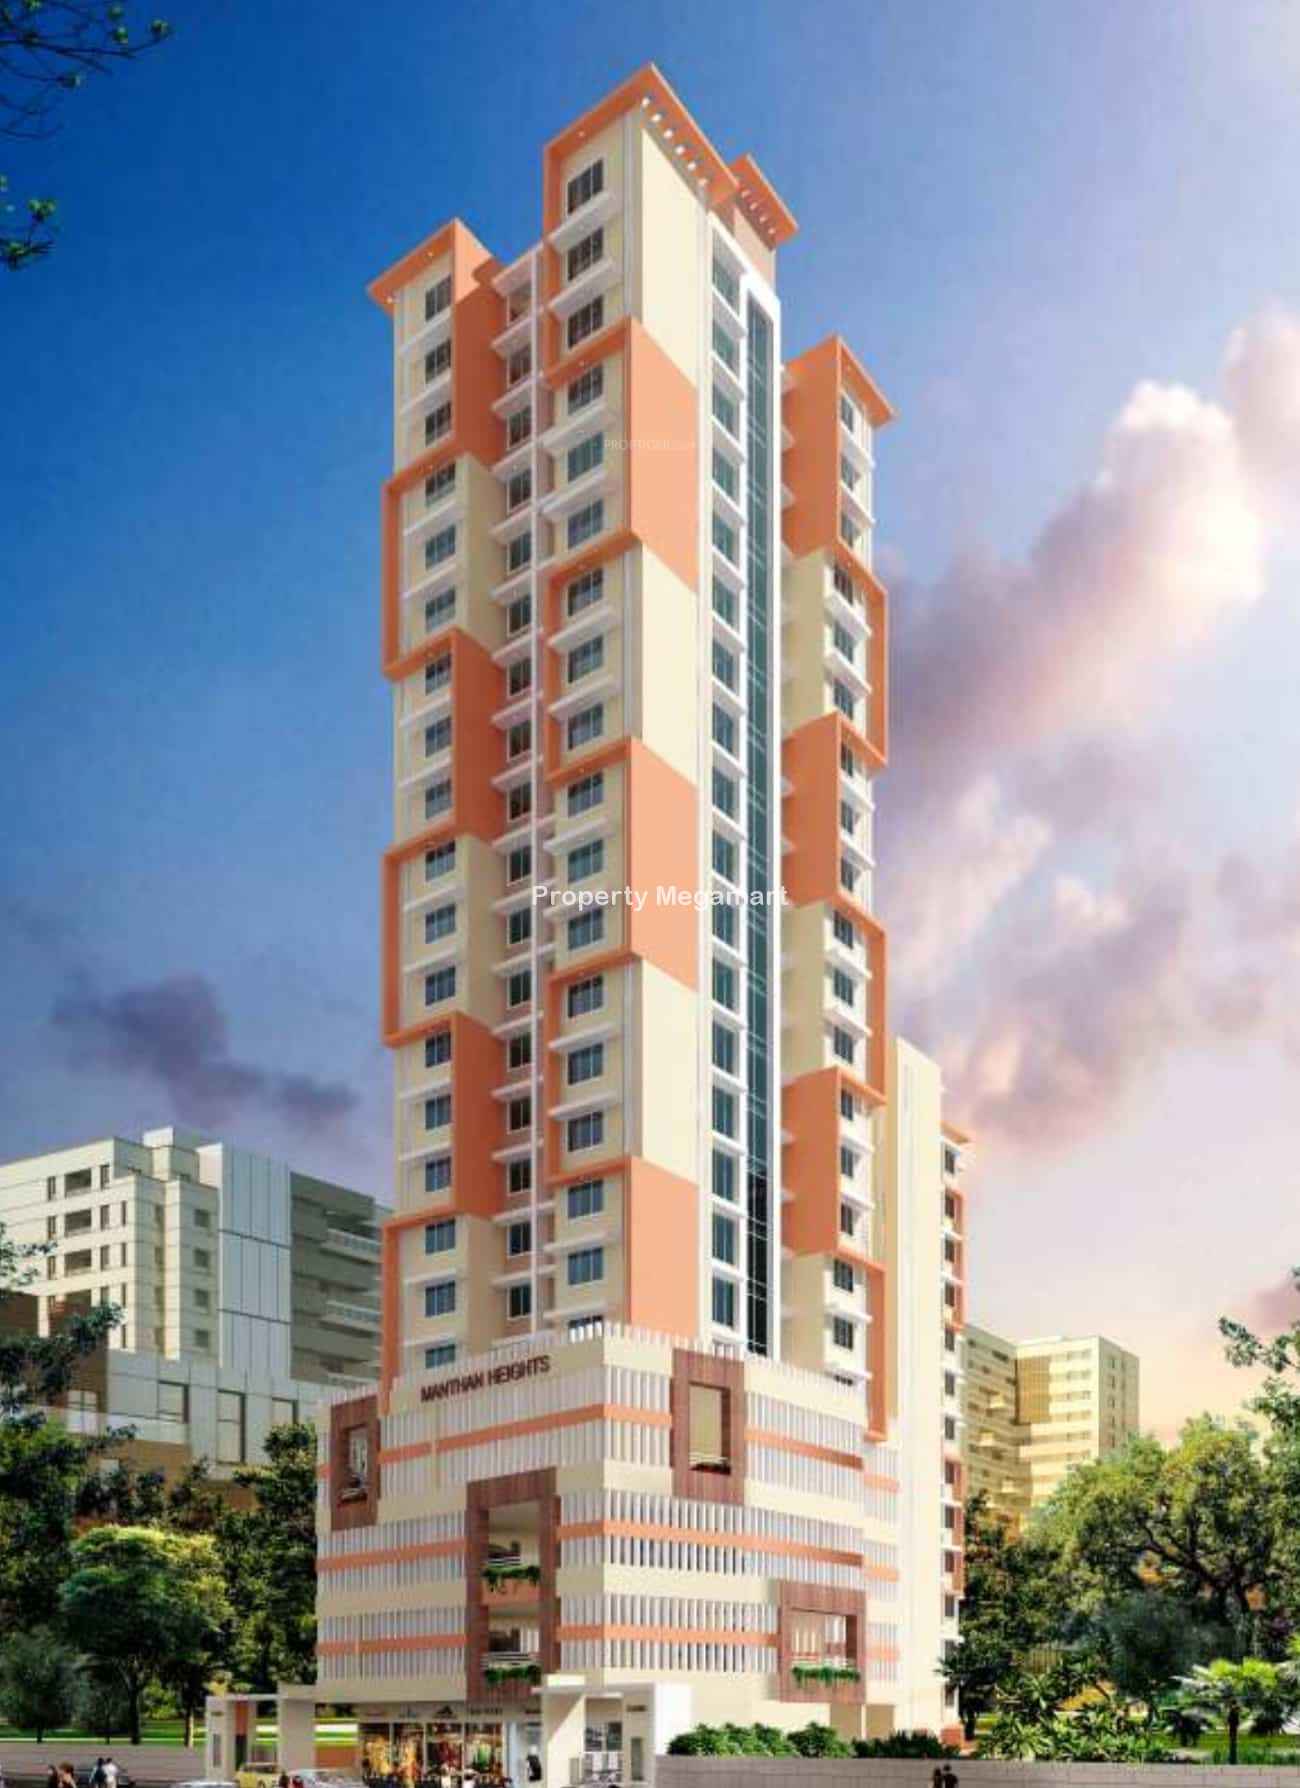 Manthan Heights